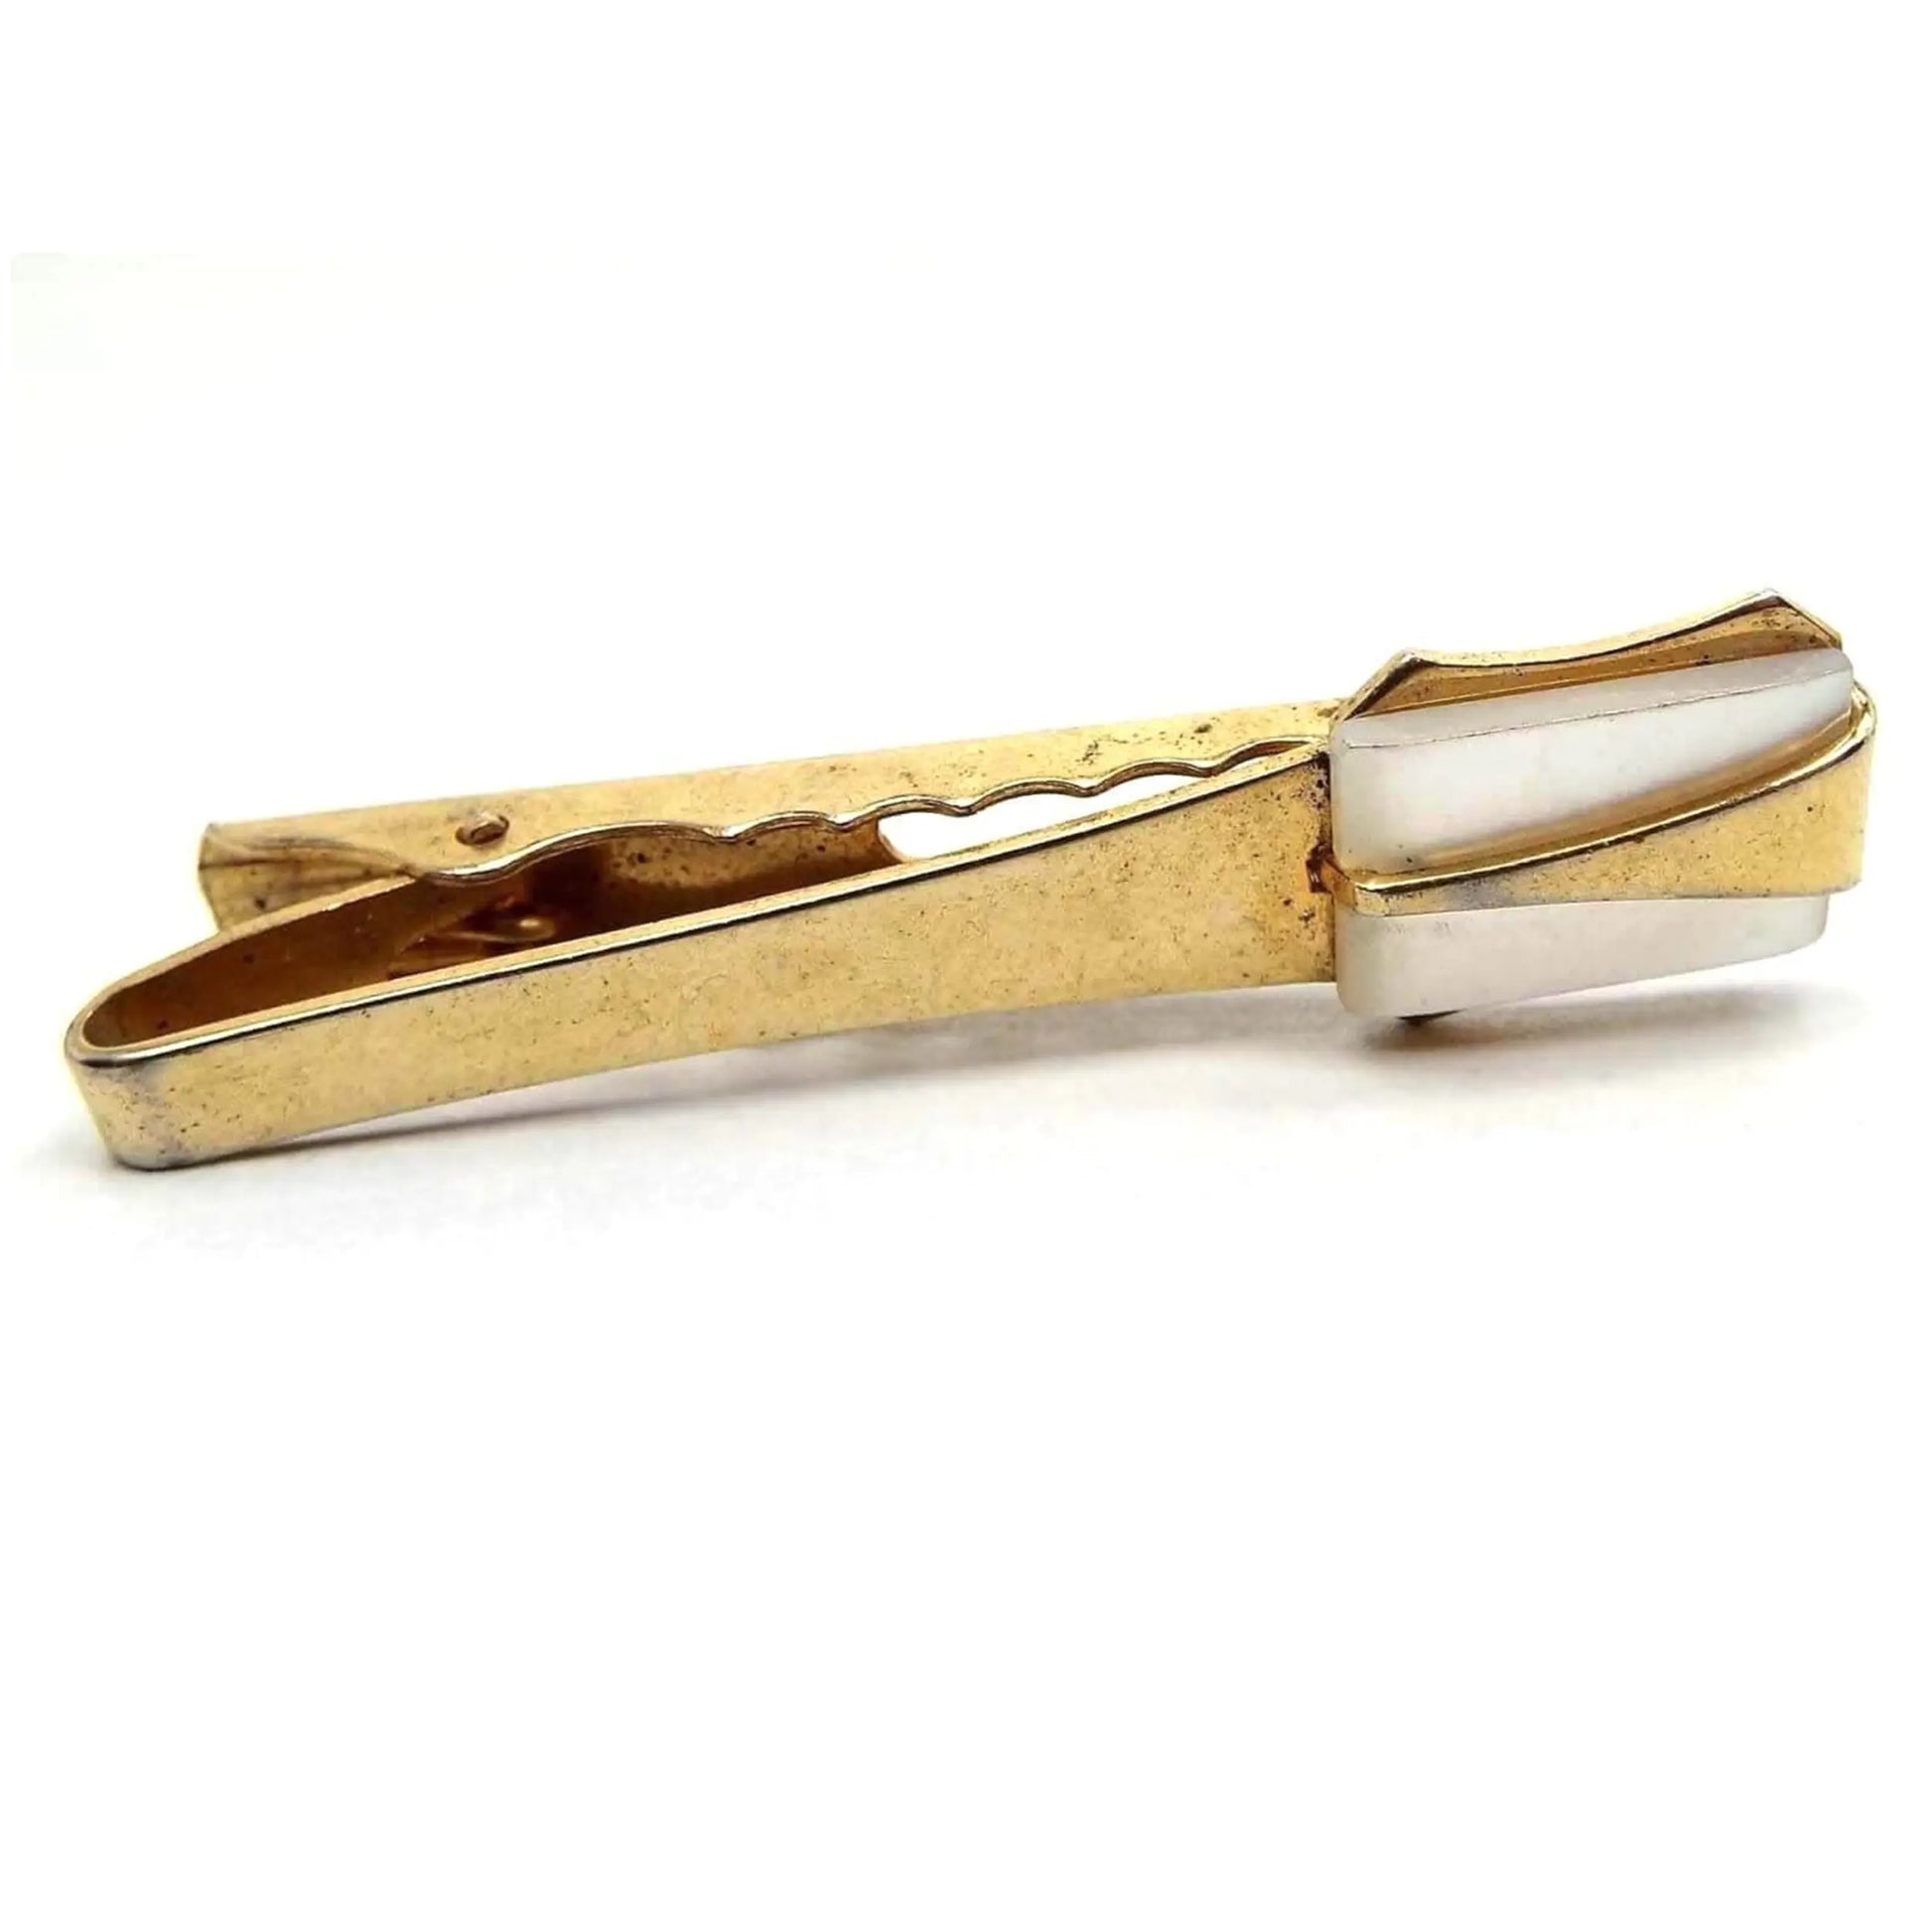 Front view of the Mid Century Anson tie clip. It is gold tone in color with a pearly white rectangle mother of pearl shell cab on the end. There is a gold tone color metal elongated triangle over the mother of pearl cab that has the top point pointing inwards. There is an alligator style clip on the back. There are some tiny dark spots on the metal bar on the front when magnified.